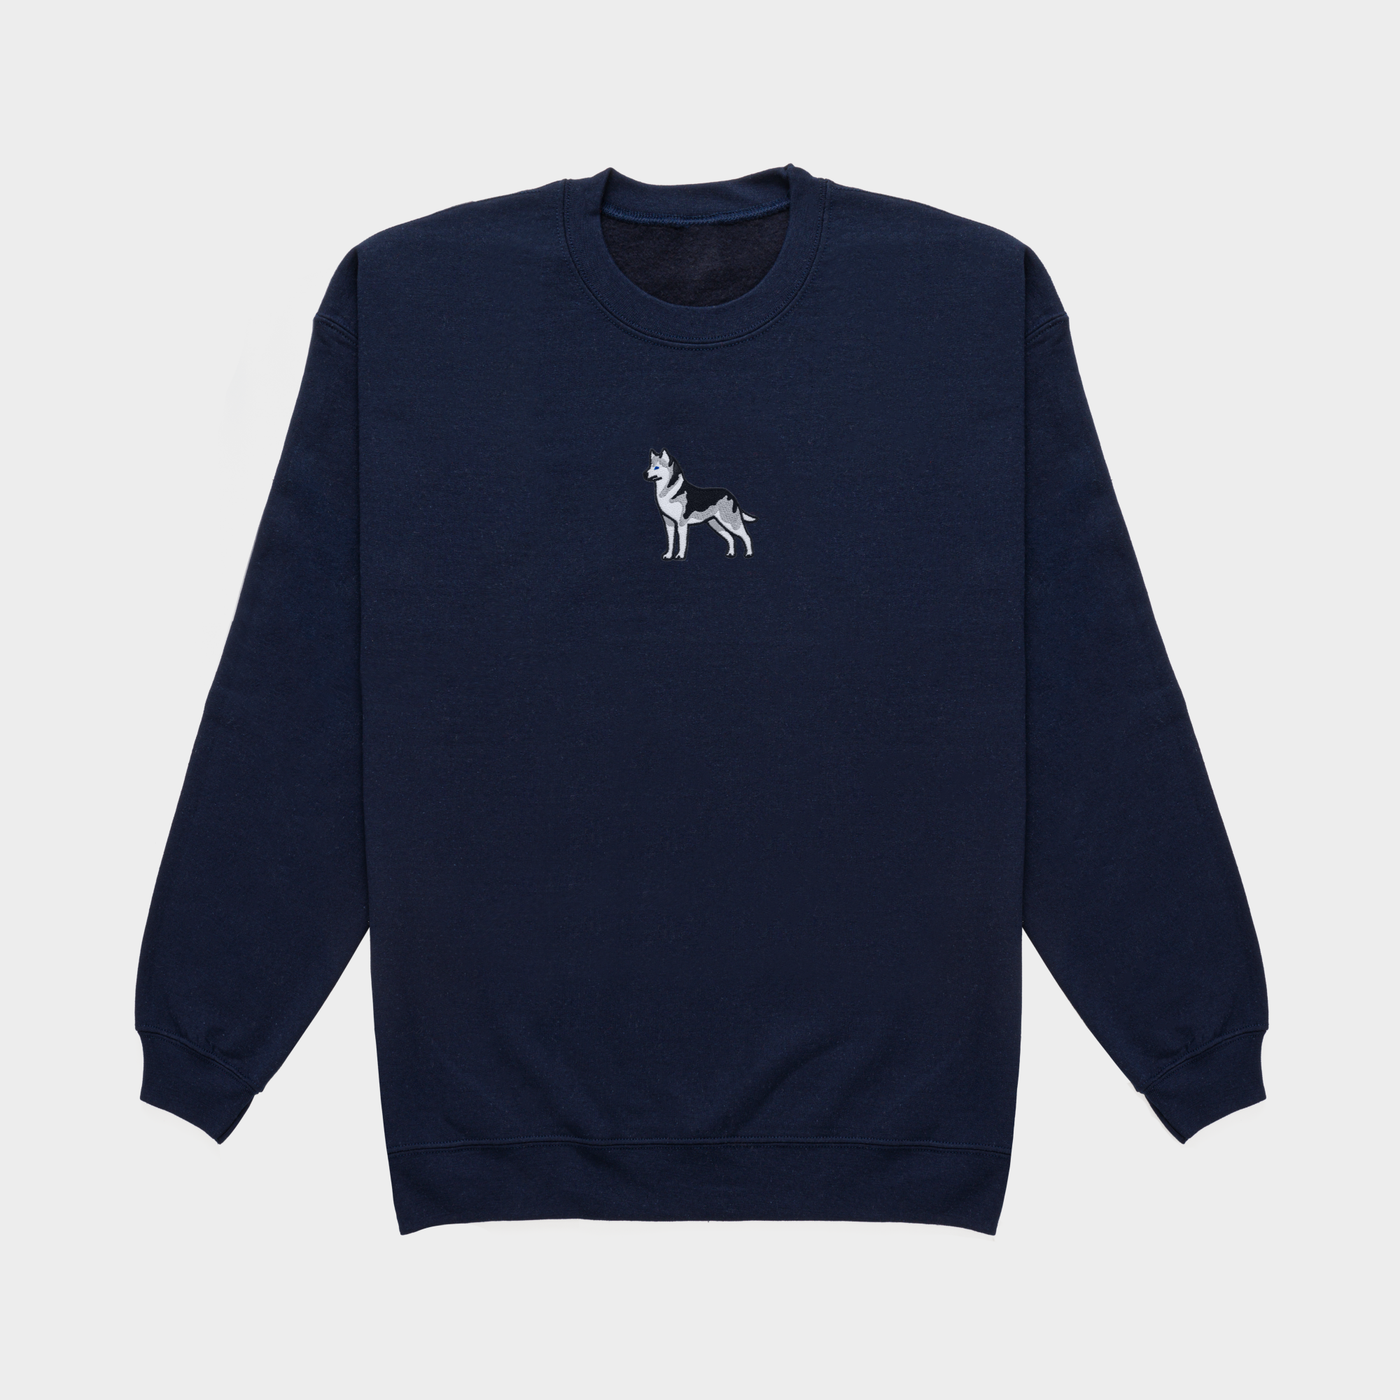 Bobby's Planet Men's Embroidered Siberian Husky Sweatshirt from Paws Dog Cat Animals Collection in Navy Color#color_navy